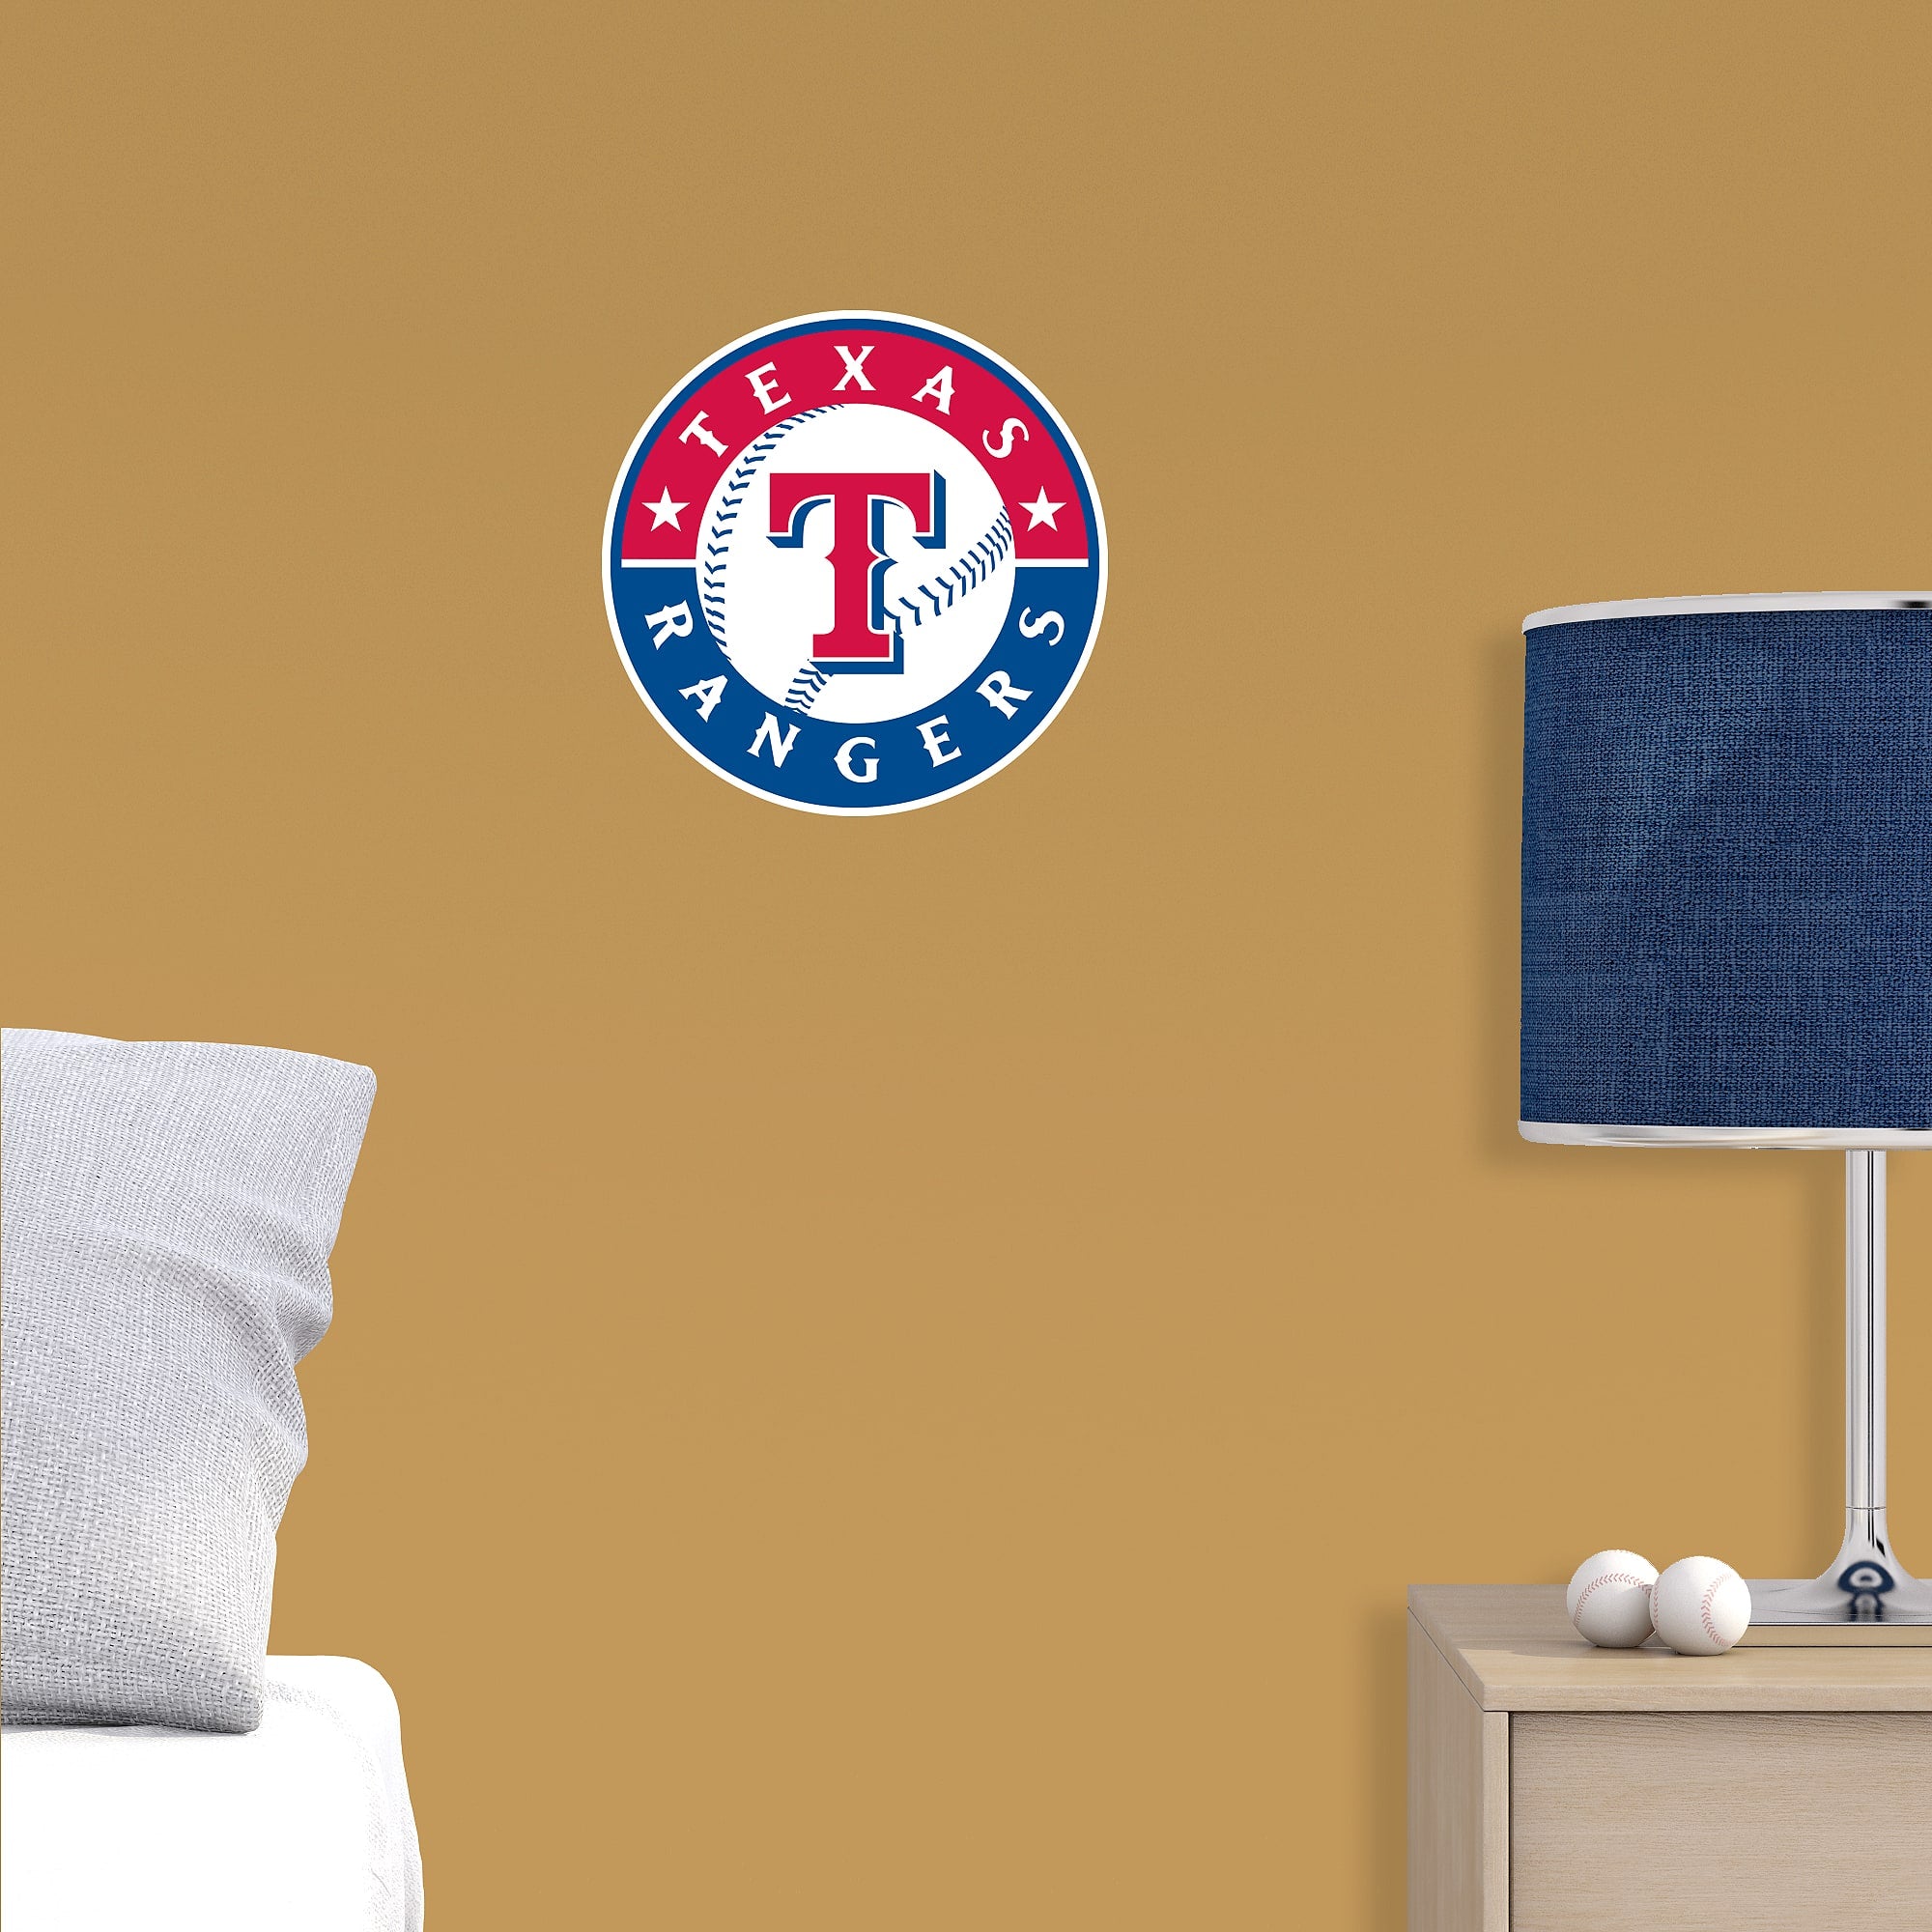 Texas Rangers: Logo - Officially Licensed MLB Removable Wall Decal Large by Fathead | Vinyl